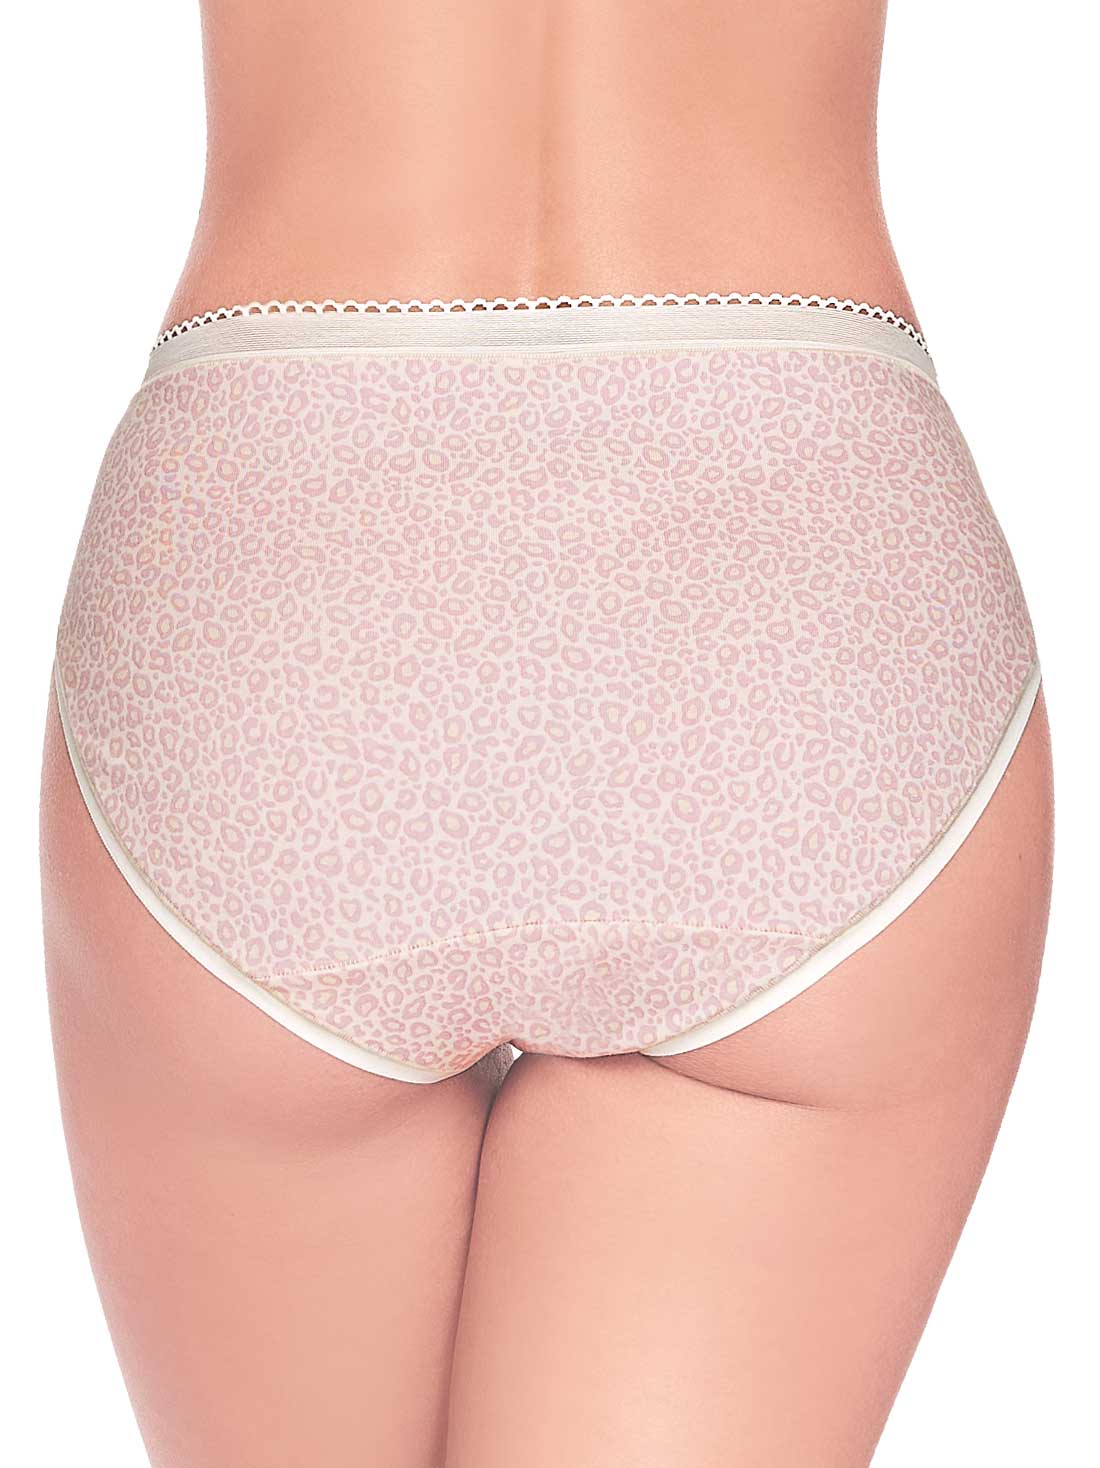 French Cut Panties 79001 - Pack of 6